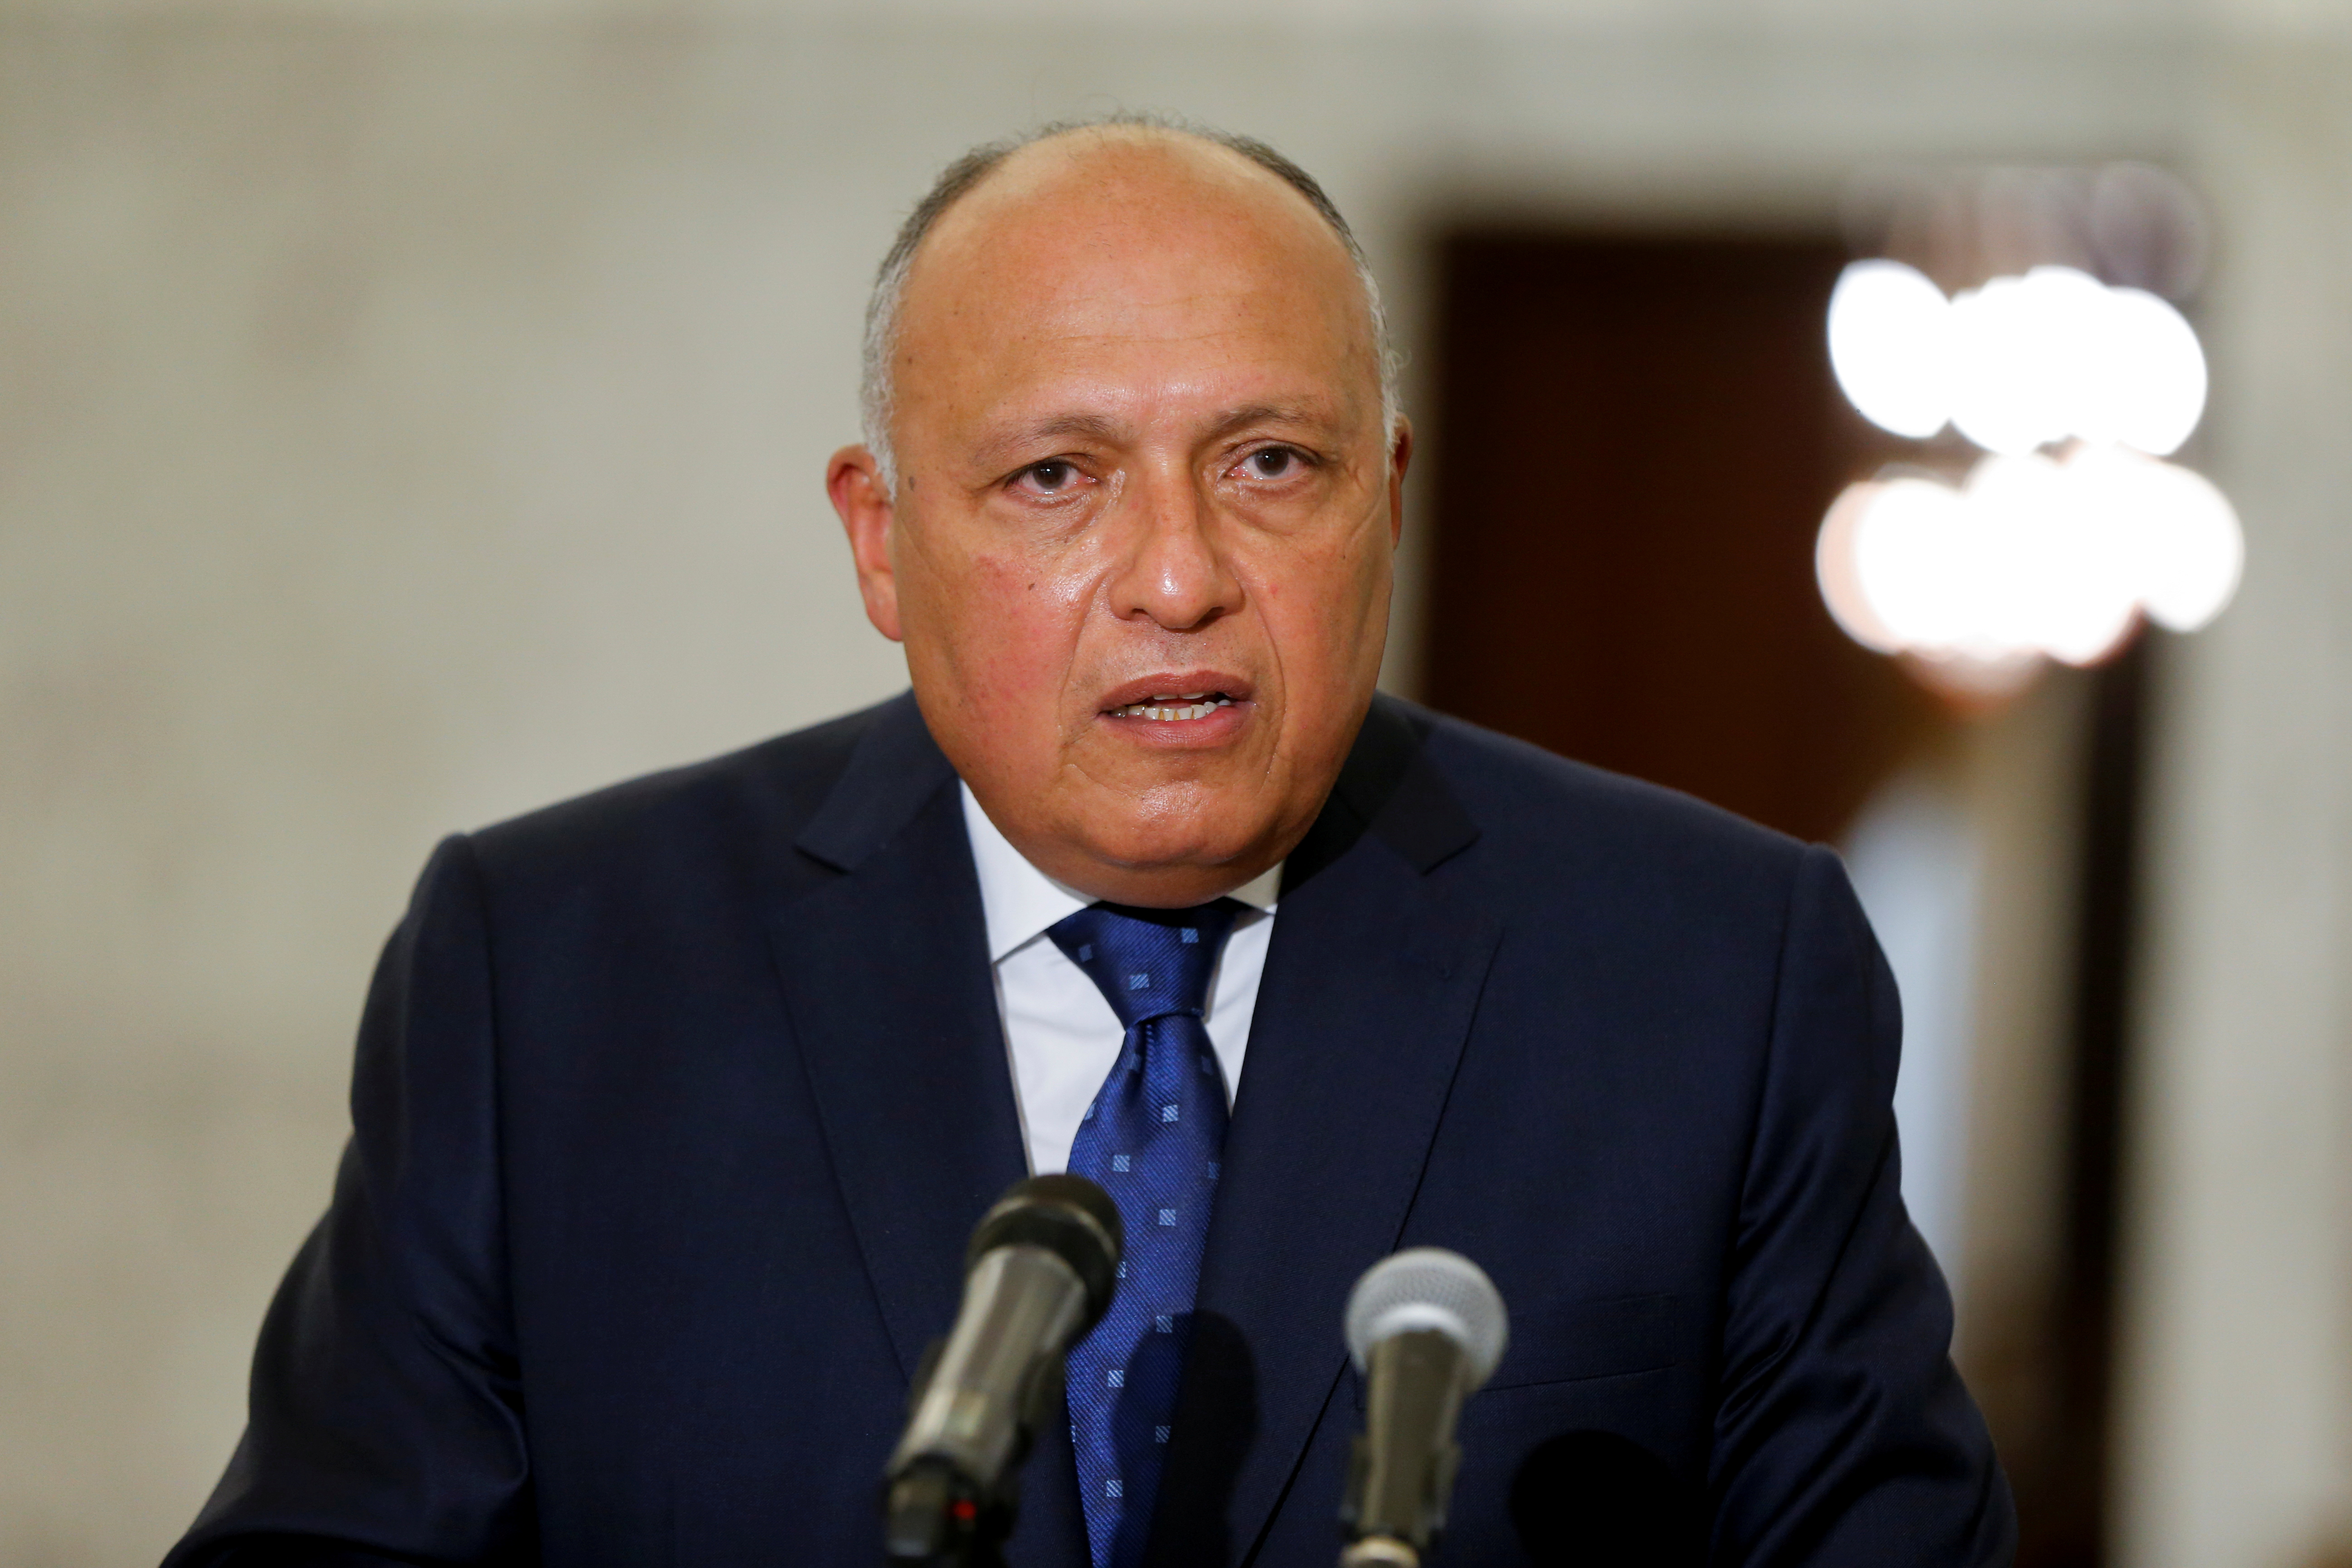 Egyptian Foreign Minister Sameh Shoukry speaks after meeting with Lebanon's President Michel Aoun at the presidential palace in Baabda